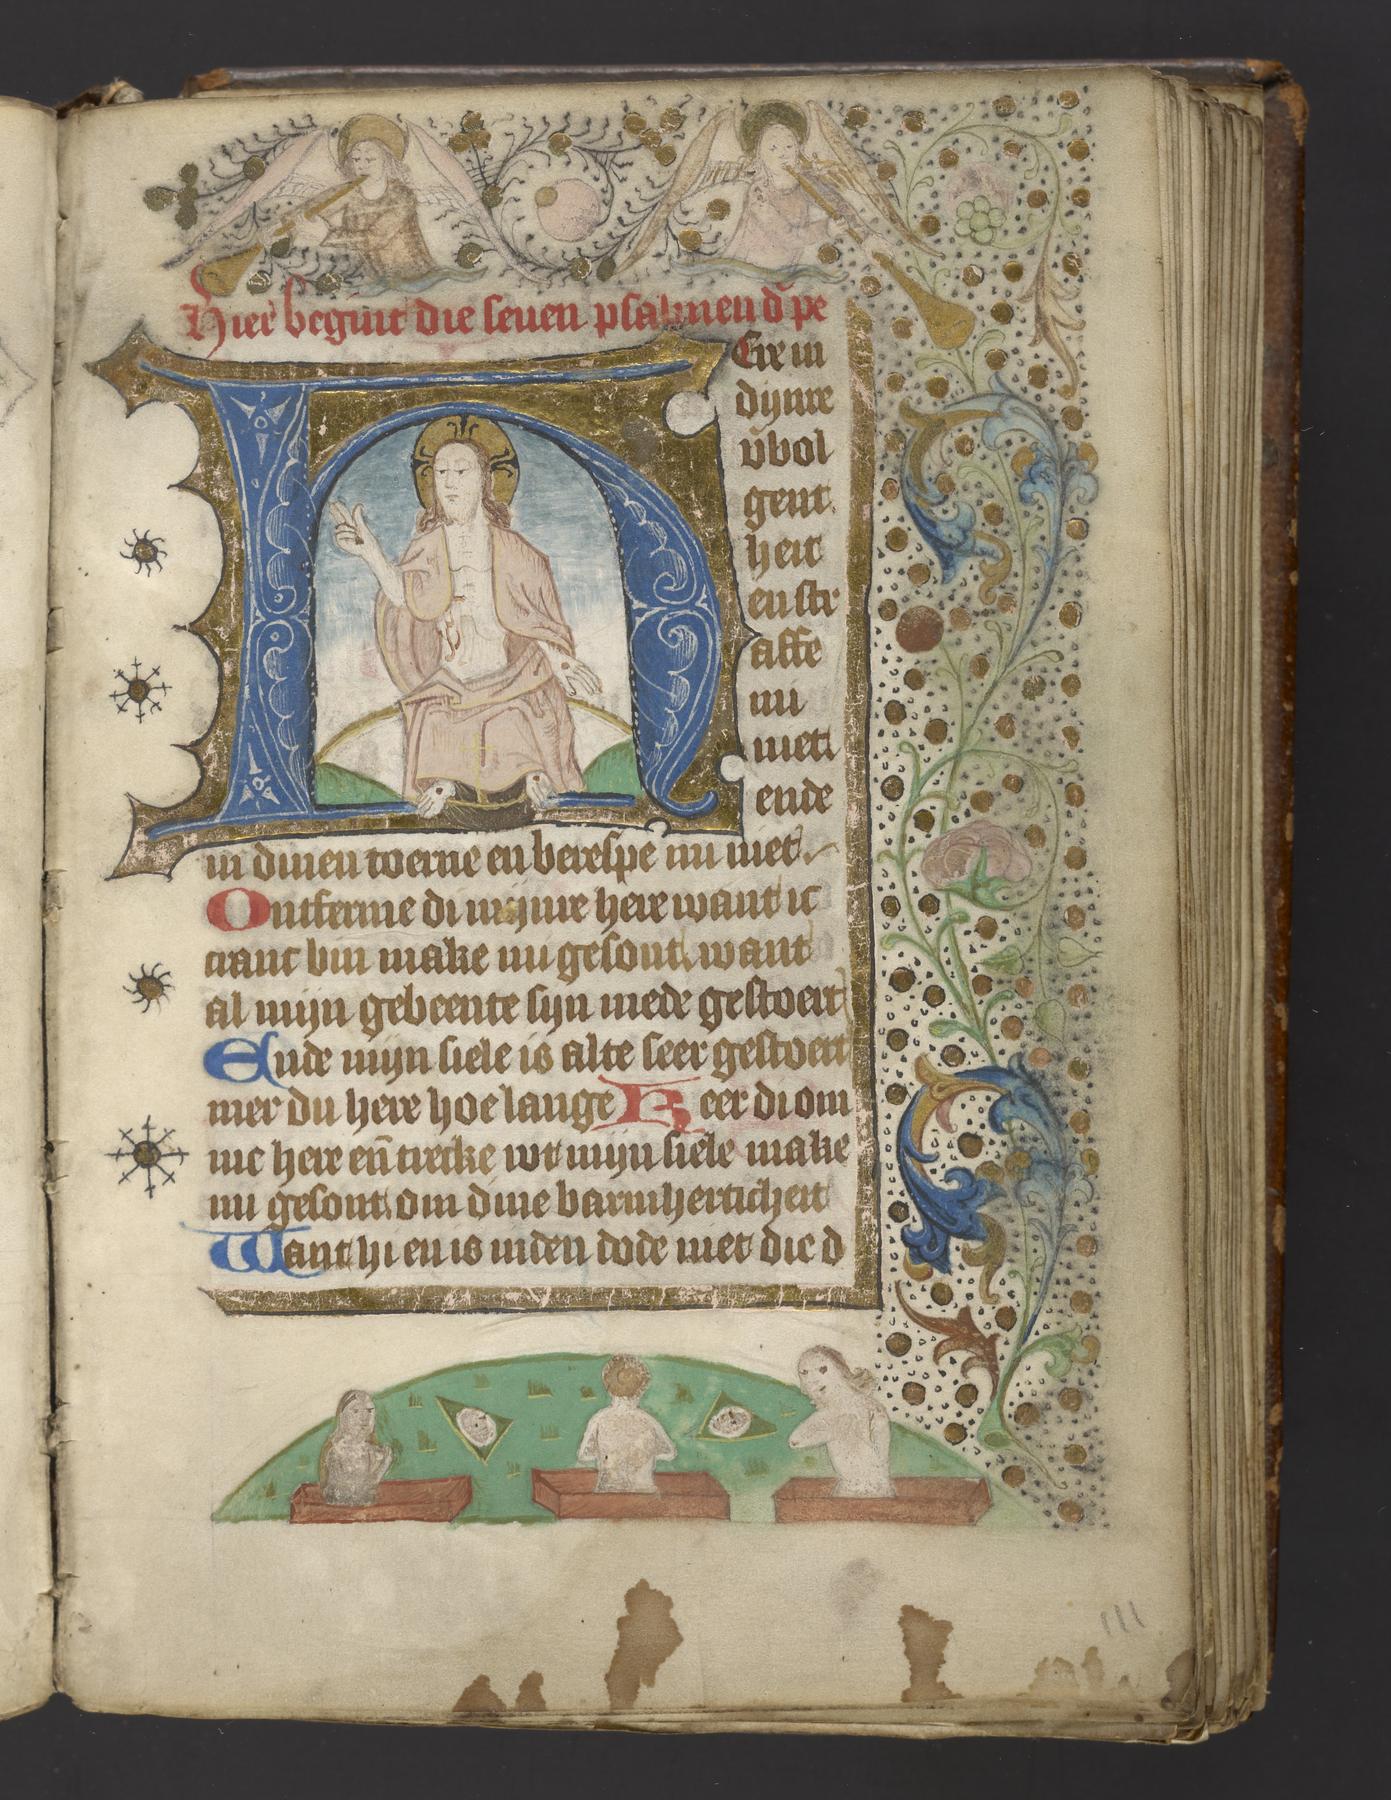 Coffee with a Codex: Flemish Book of Hours